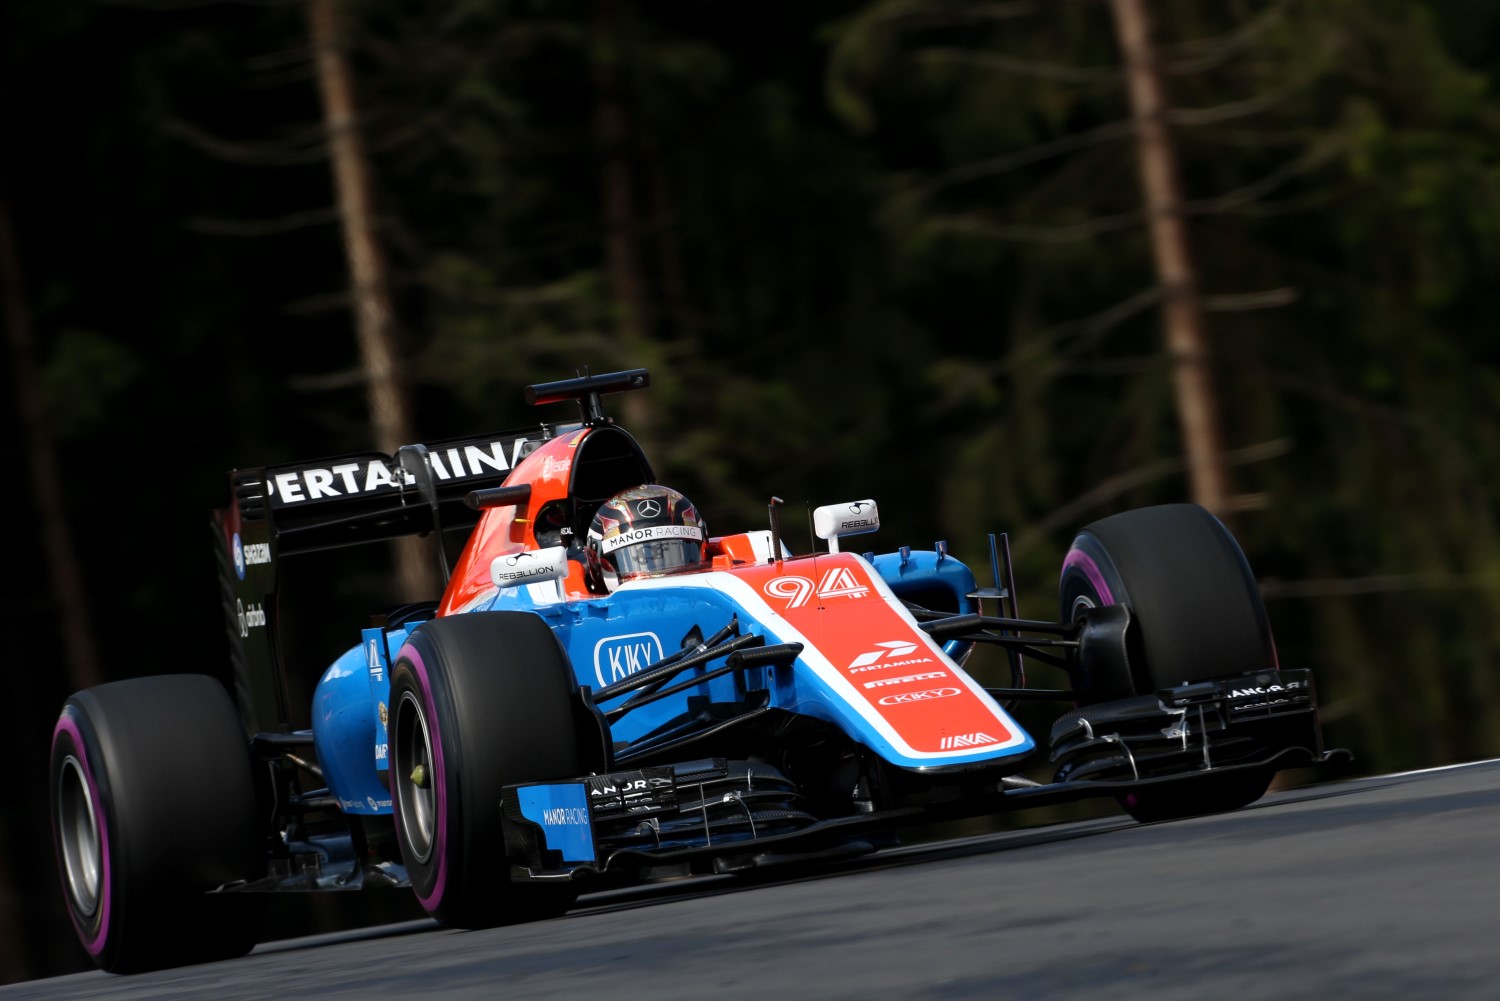 Pascal Wehrlein in the Manor in Austria